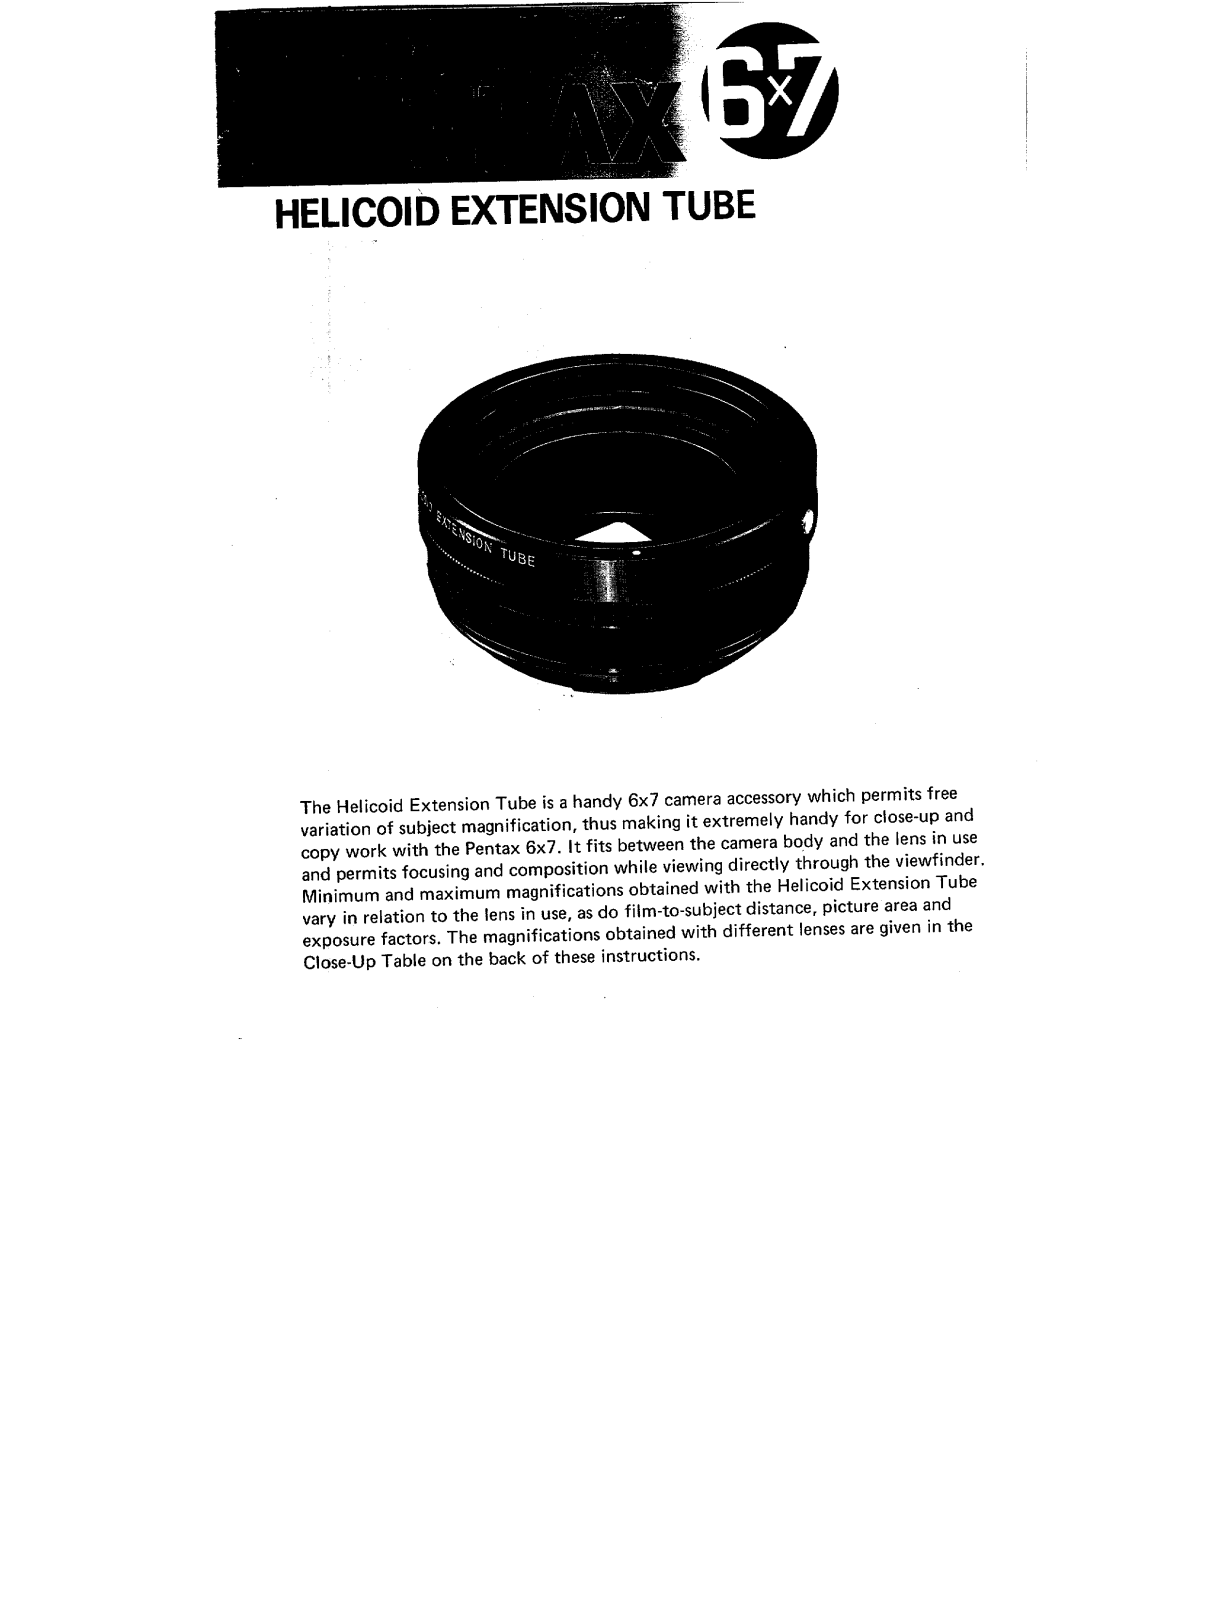 Pentax 6X7 HELICOID EXTENSION TUBE Operating Manual